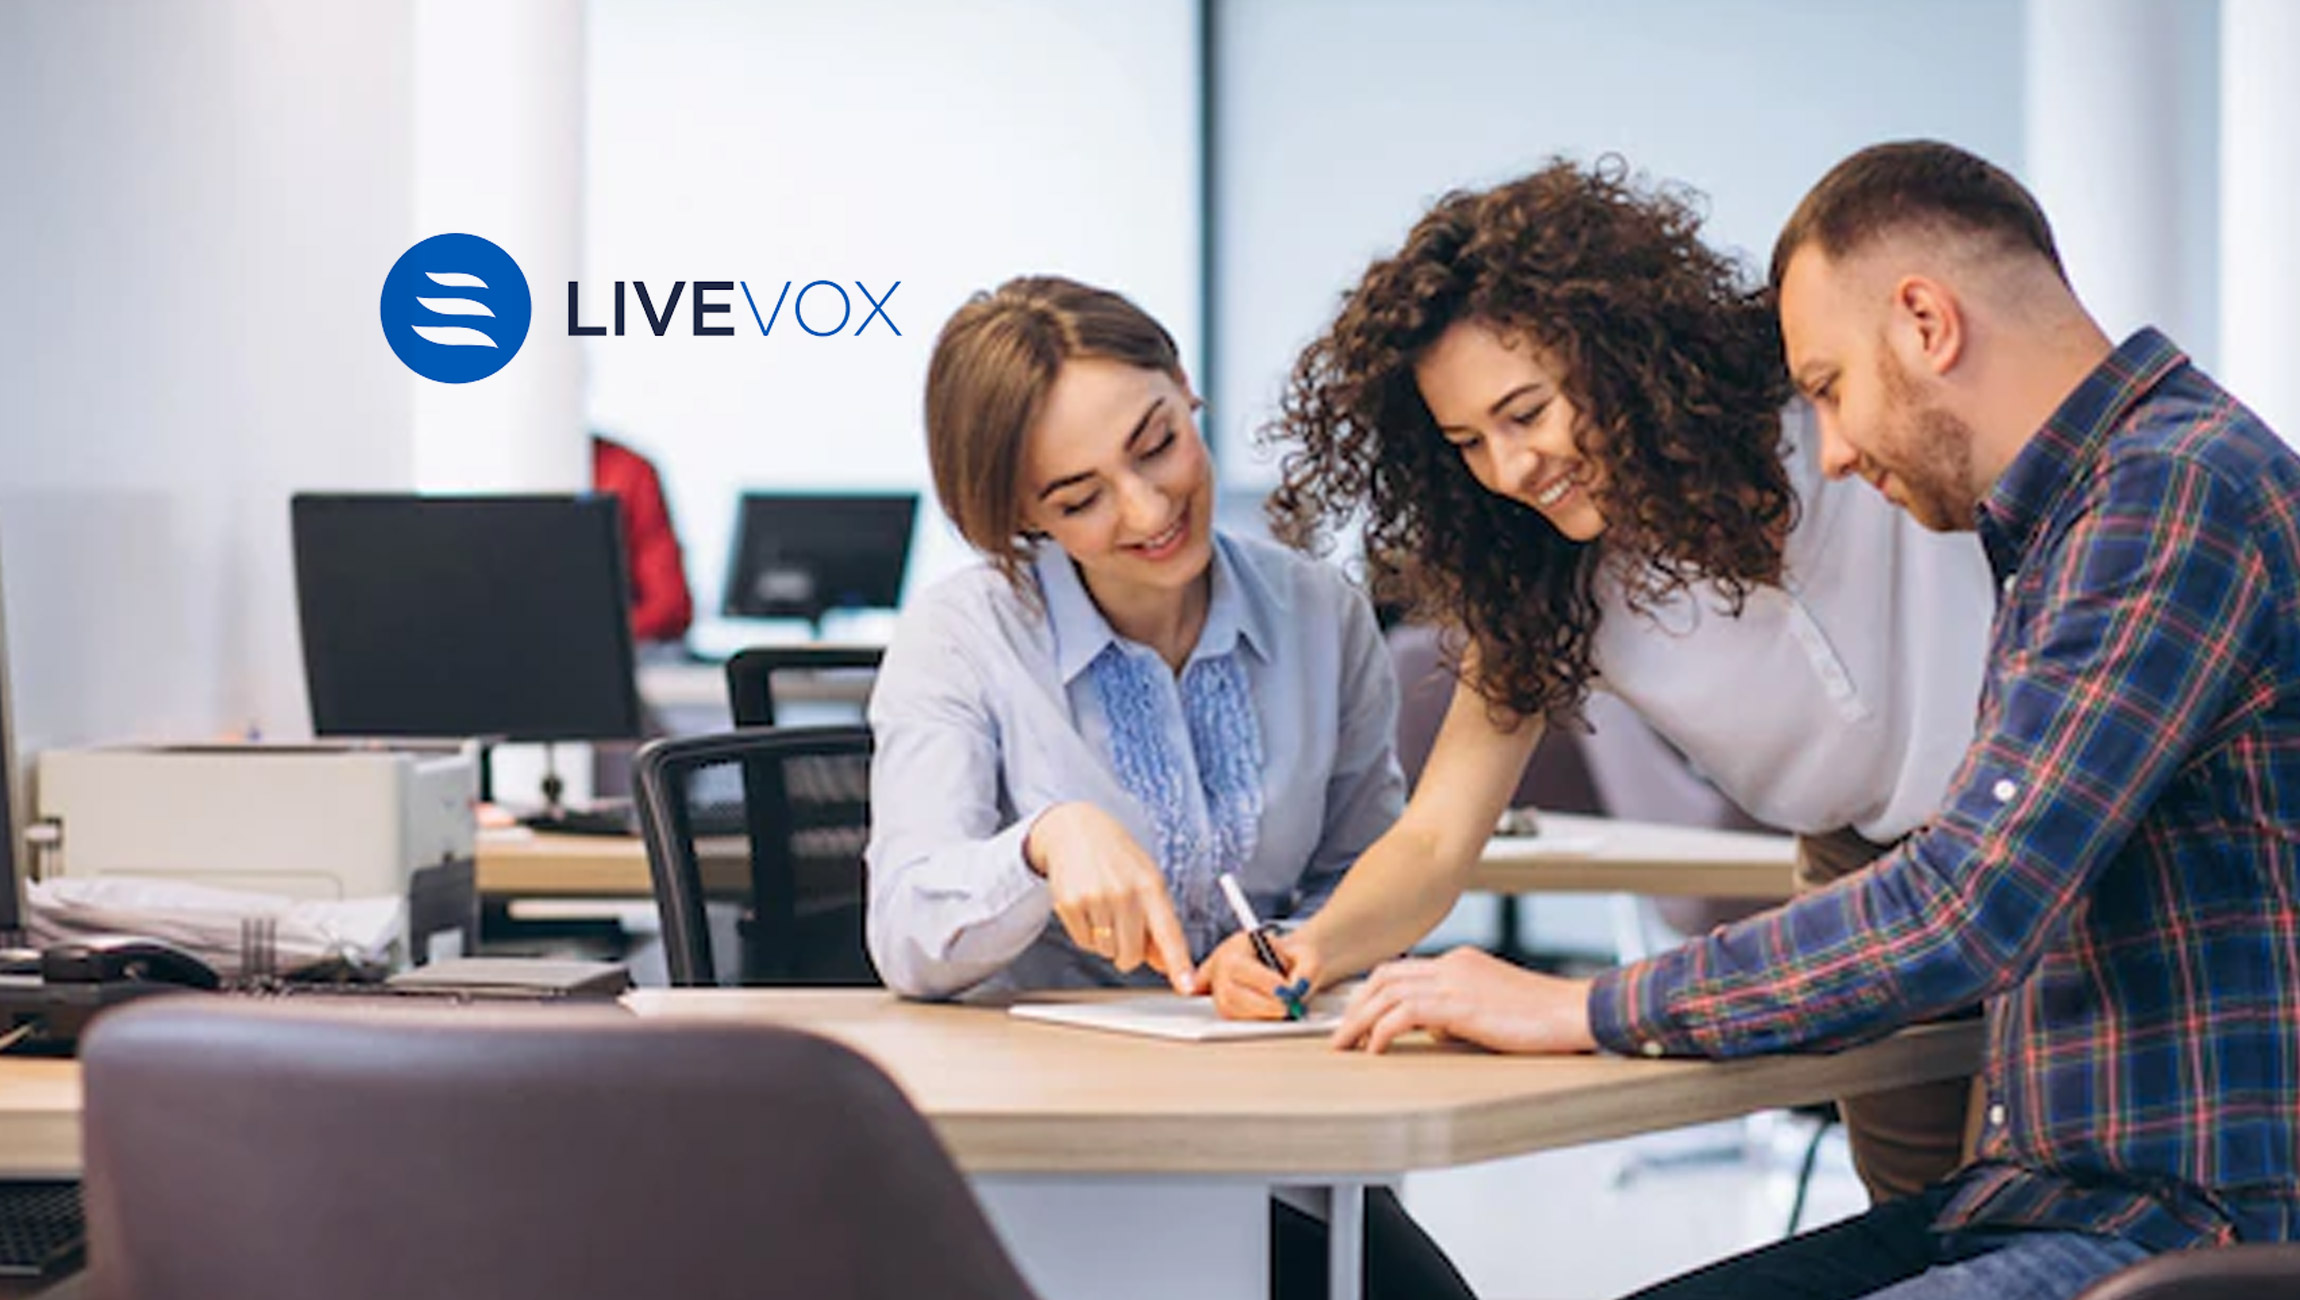 LiveVox and Omdia Study Finds that Slow Digital Adoption and Unnecessary Complexity in the Contact Center Harm Customer Experience by Impeding Agent Productivity 1